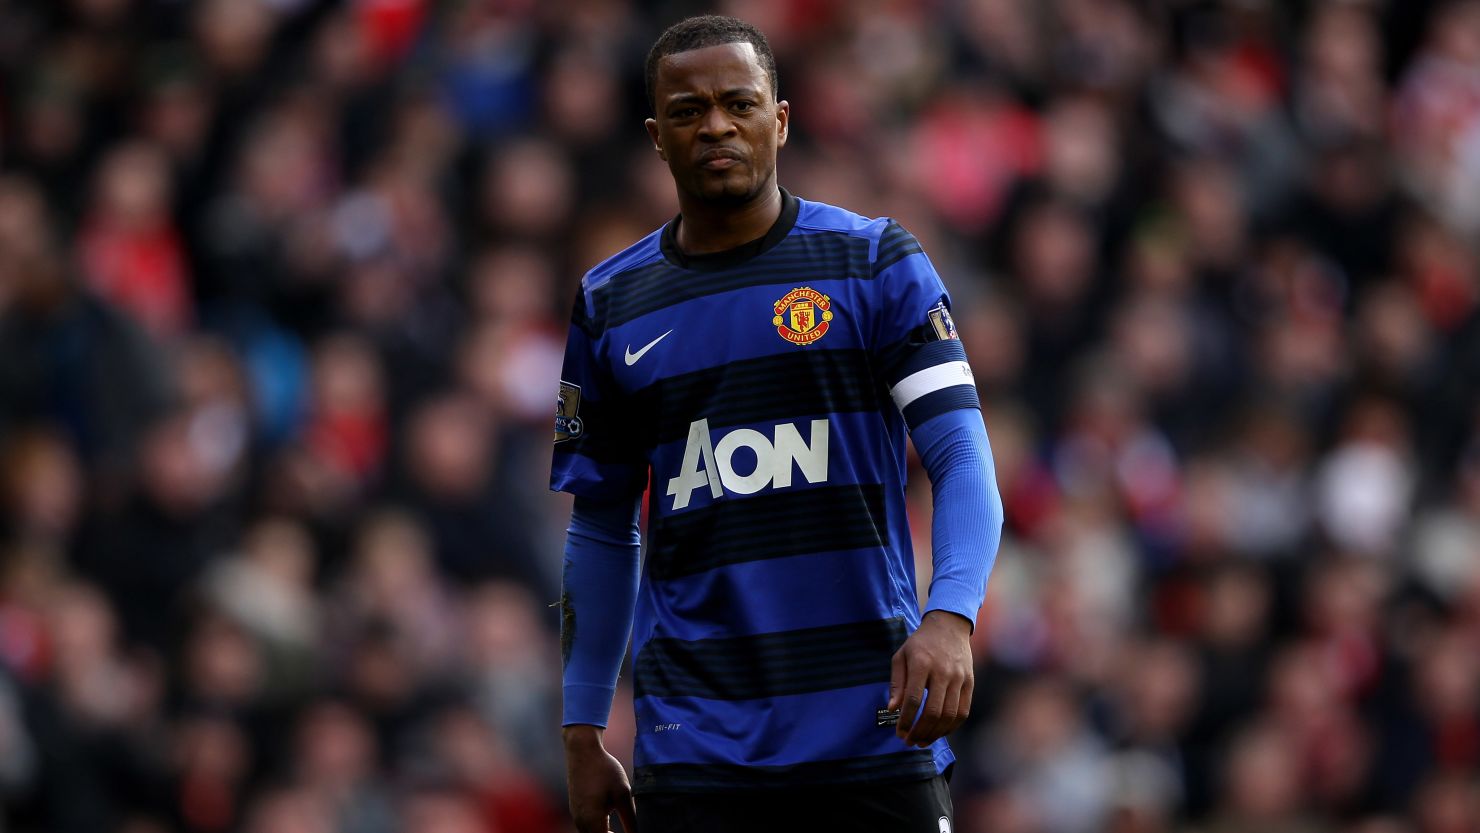 Patrice Evra played in the game at Liverpool, where a man was arrested on suspicion of making a racially abusive gesture.